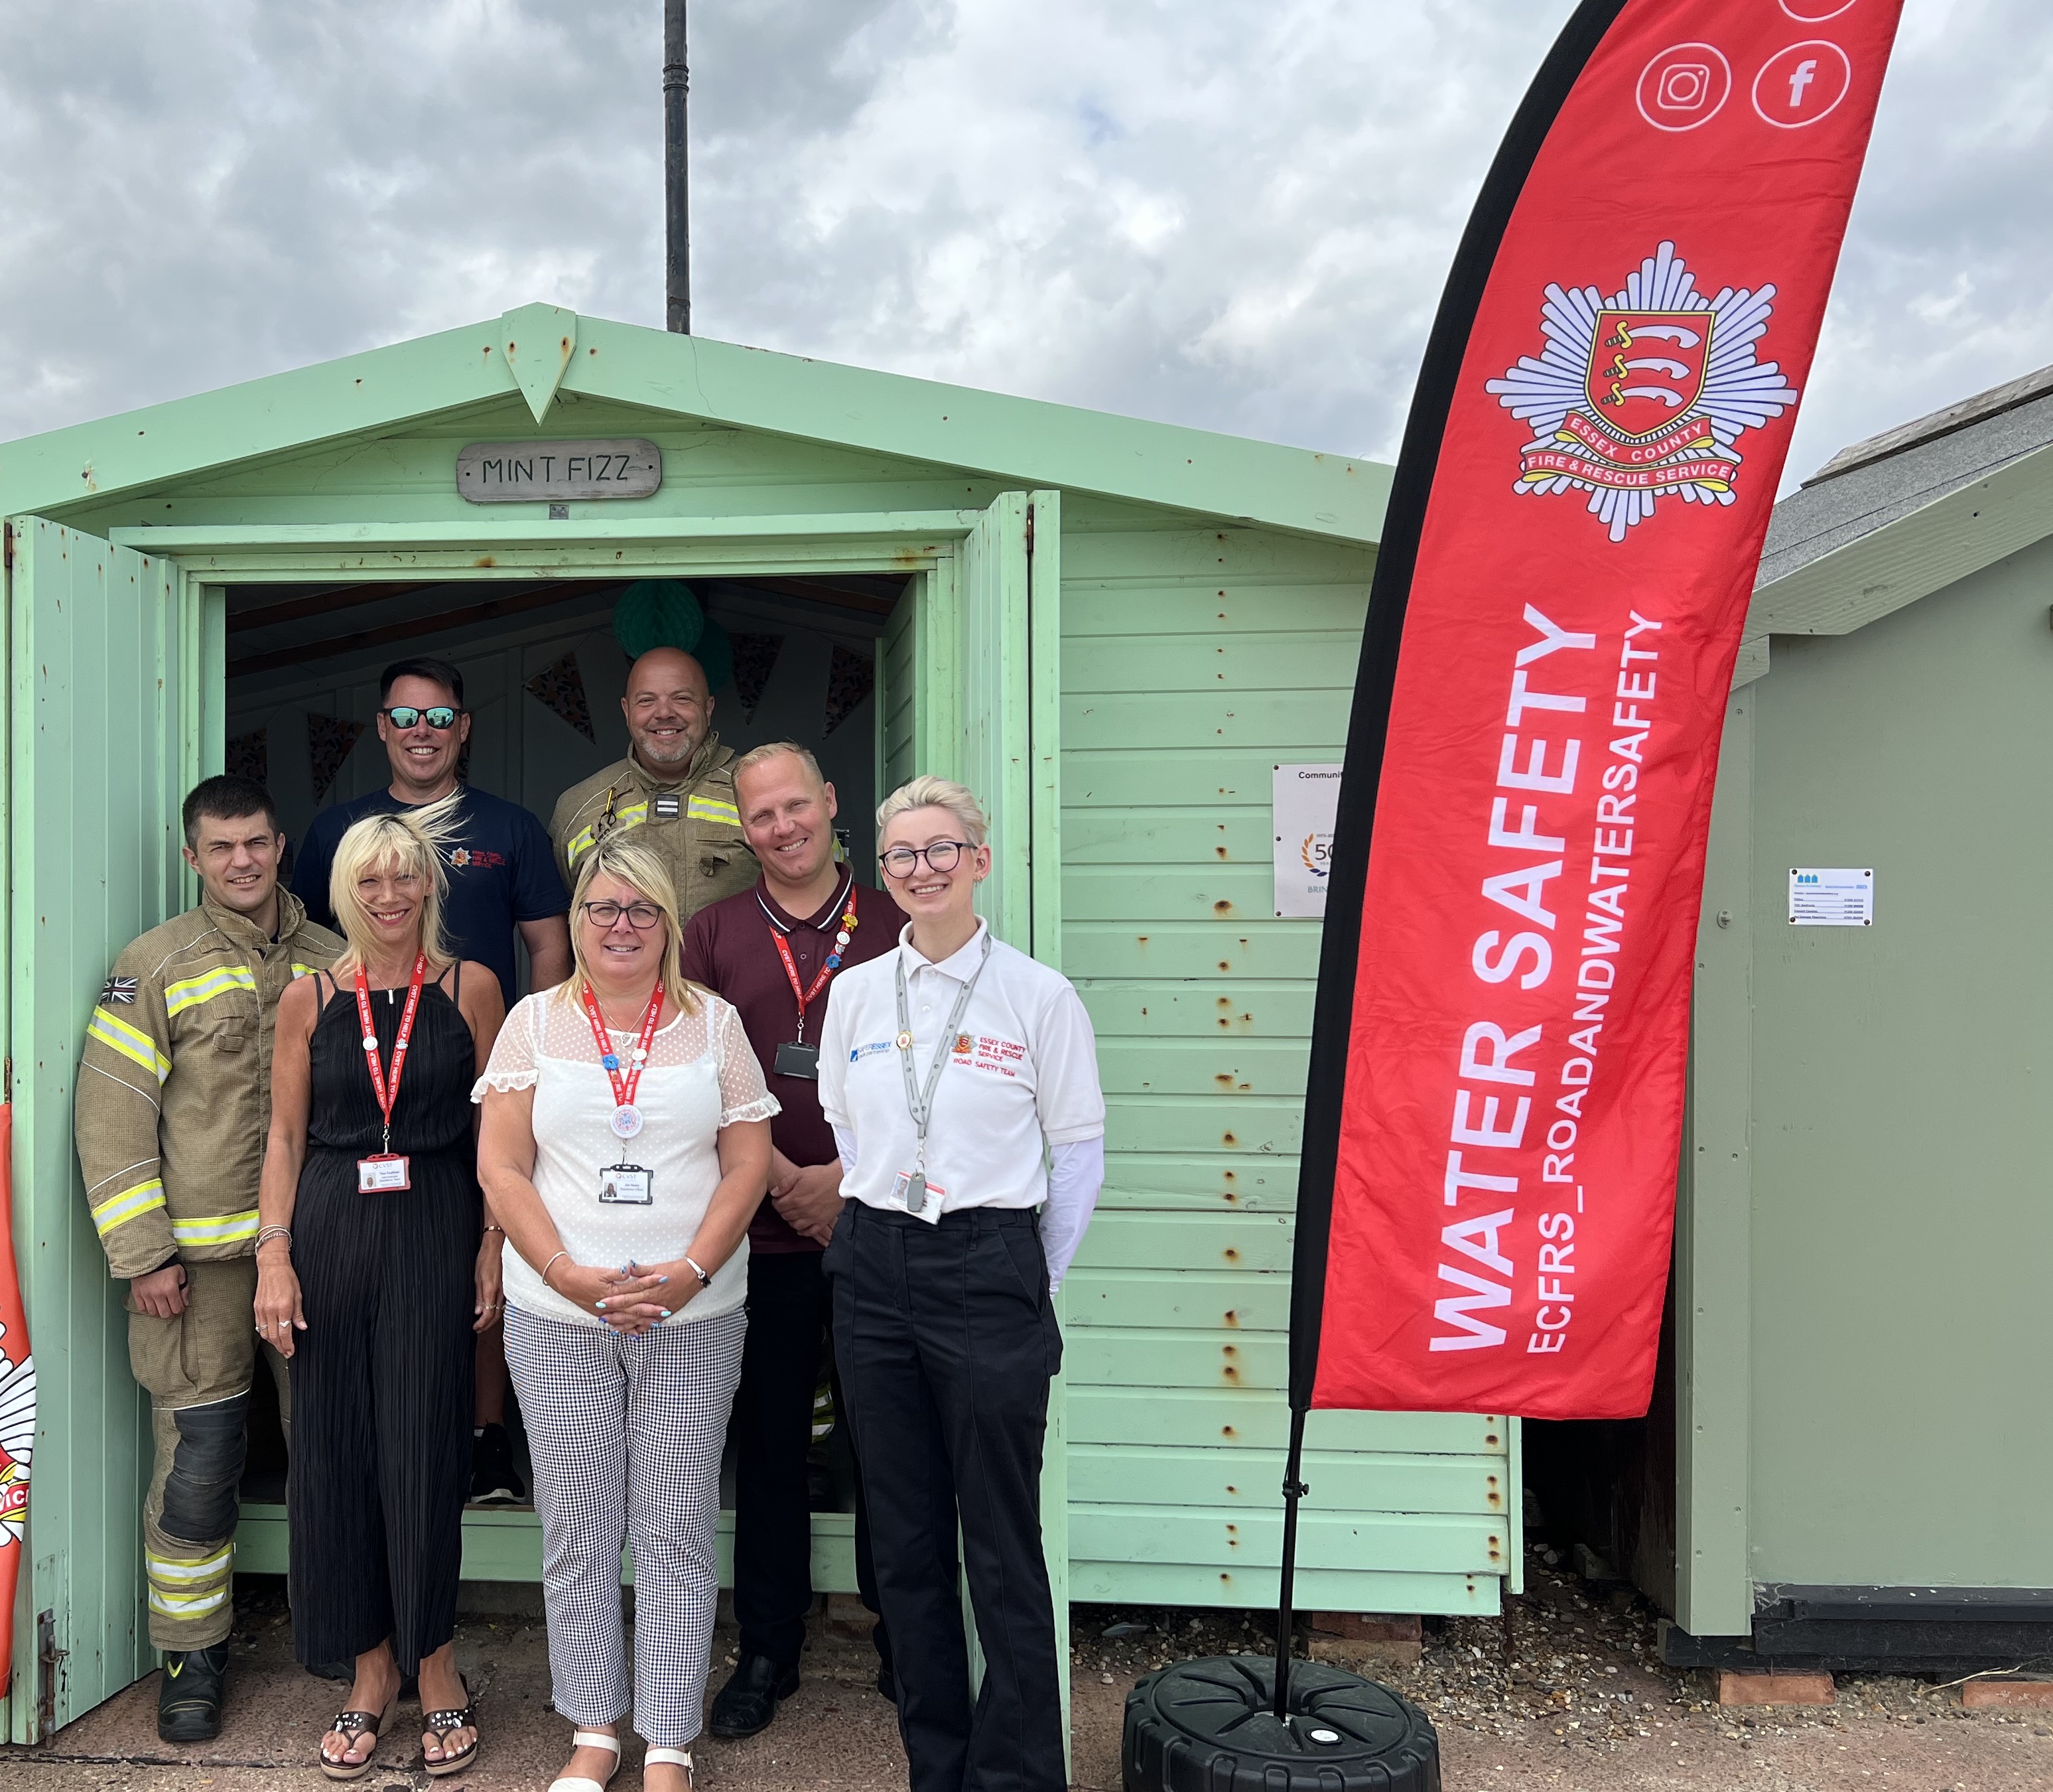 ECFRS staff with CVST staff in front of beach hut in Clacton